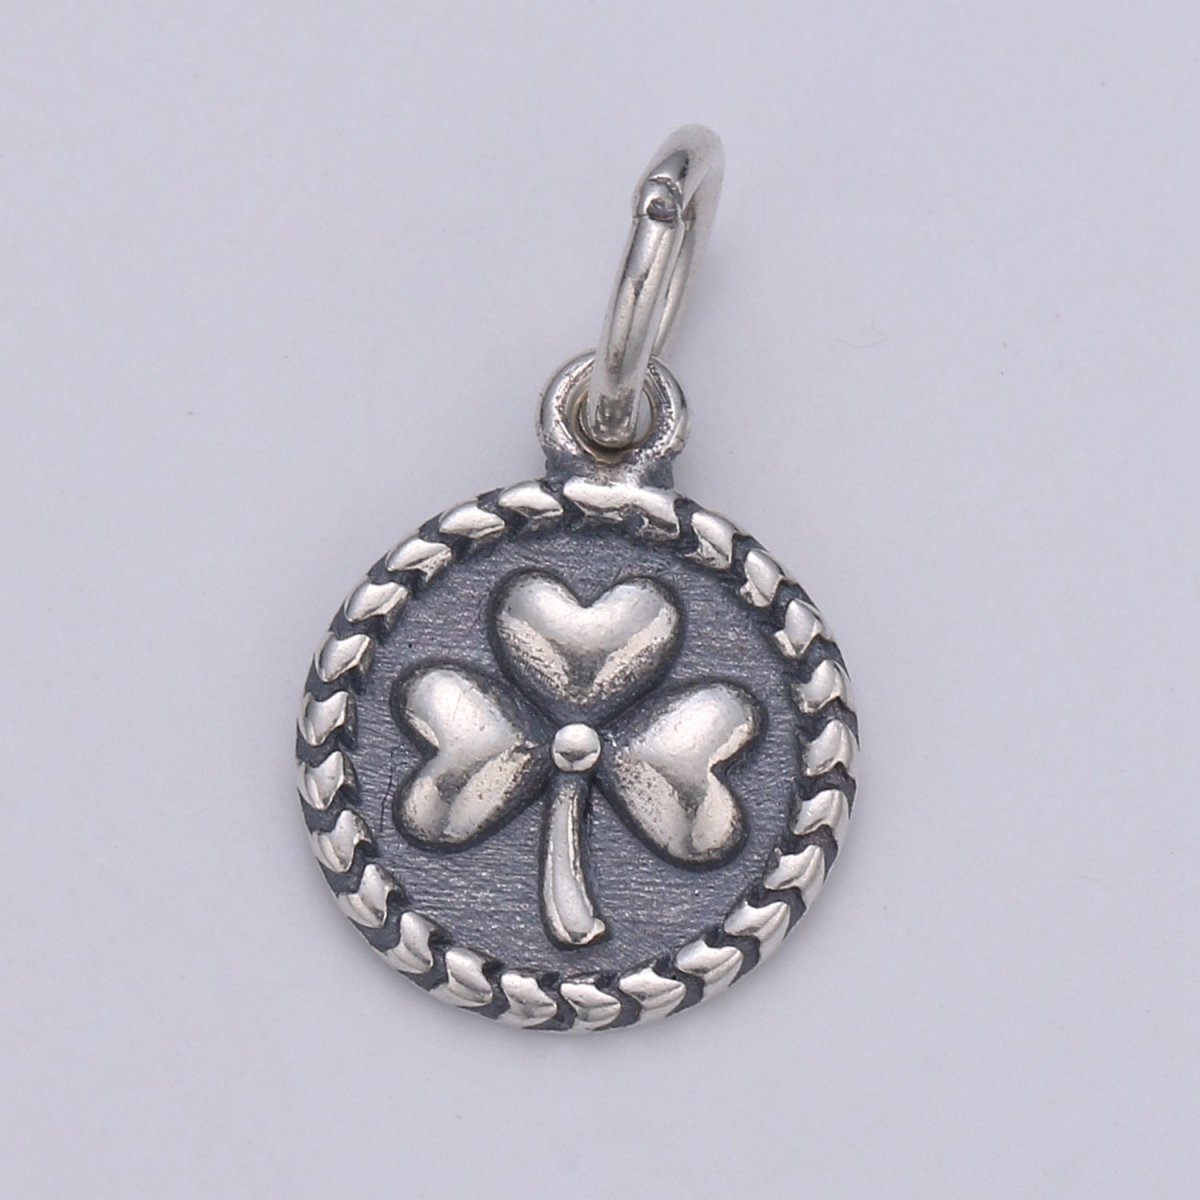 925 Sterling Silver Three Leaf Clover Charm, Message Charm Silver Happy Charm for Necklace Bracelet Earring, Good Luck Charm SL-103 - DLUXCA